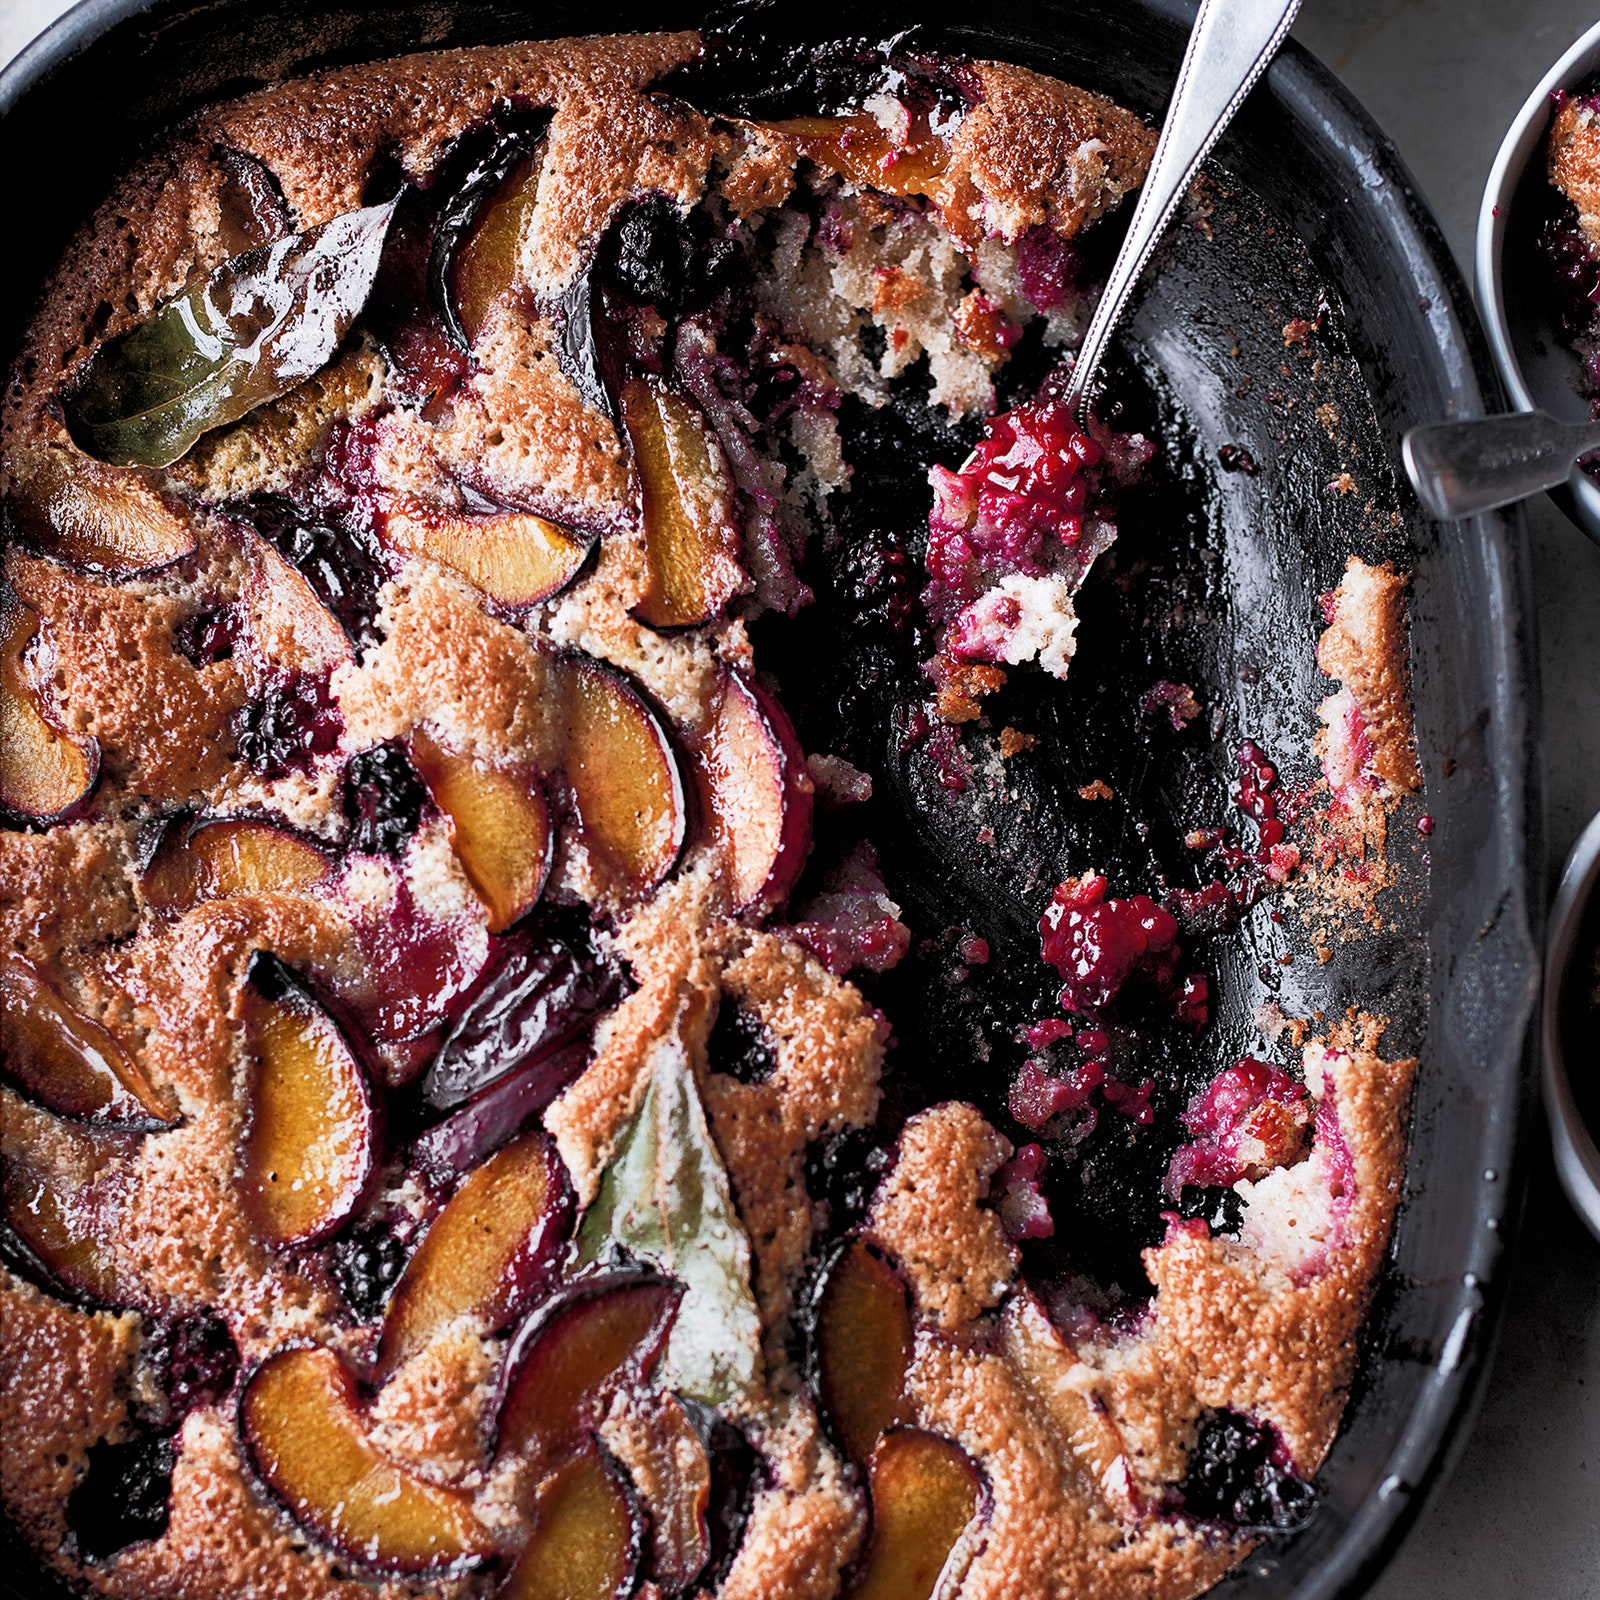 Plum, blackberry and bay friand bake